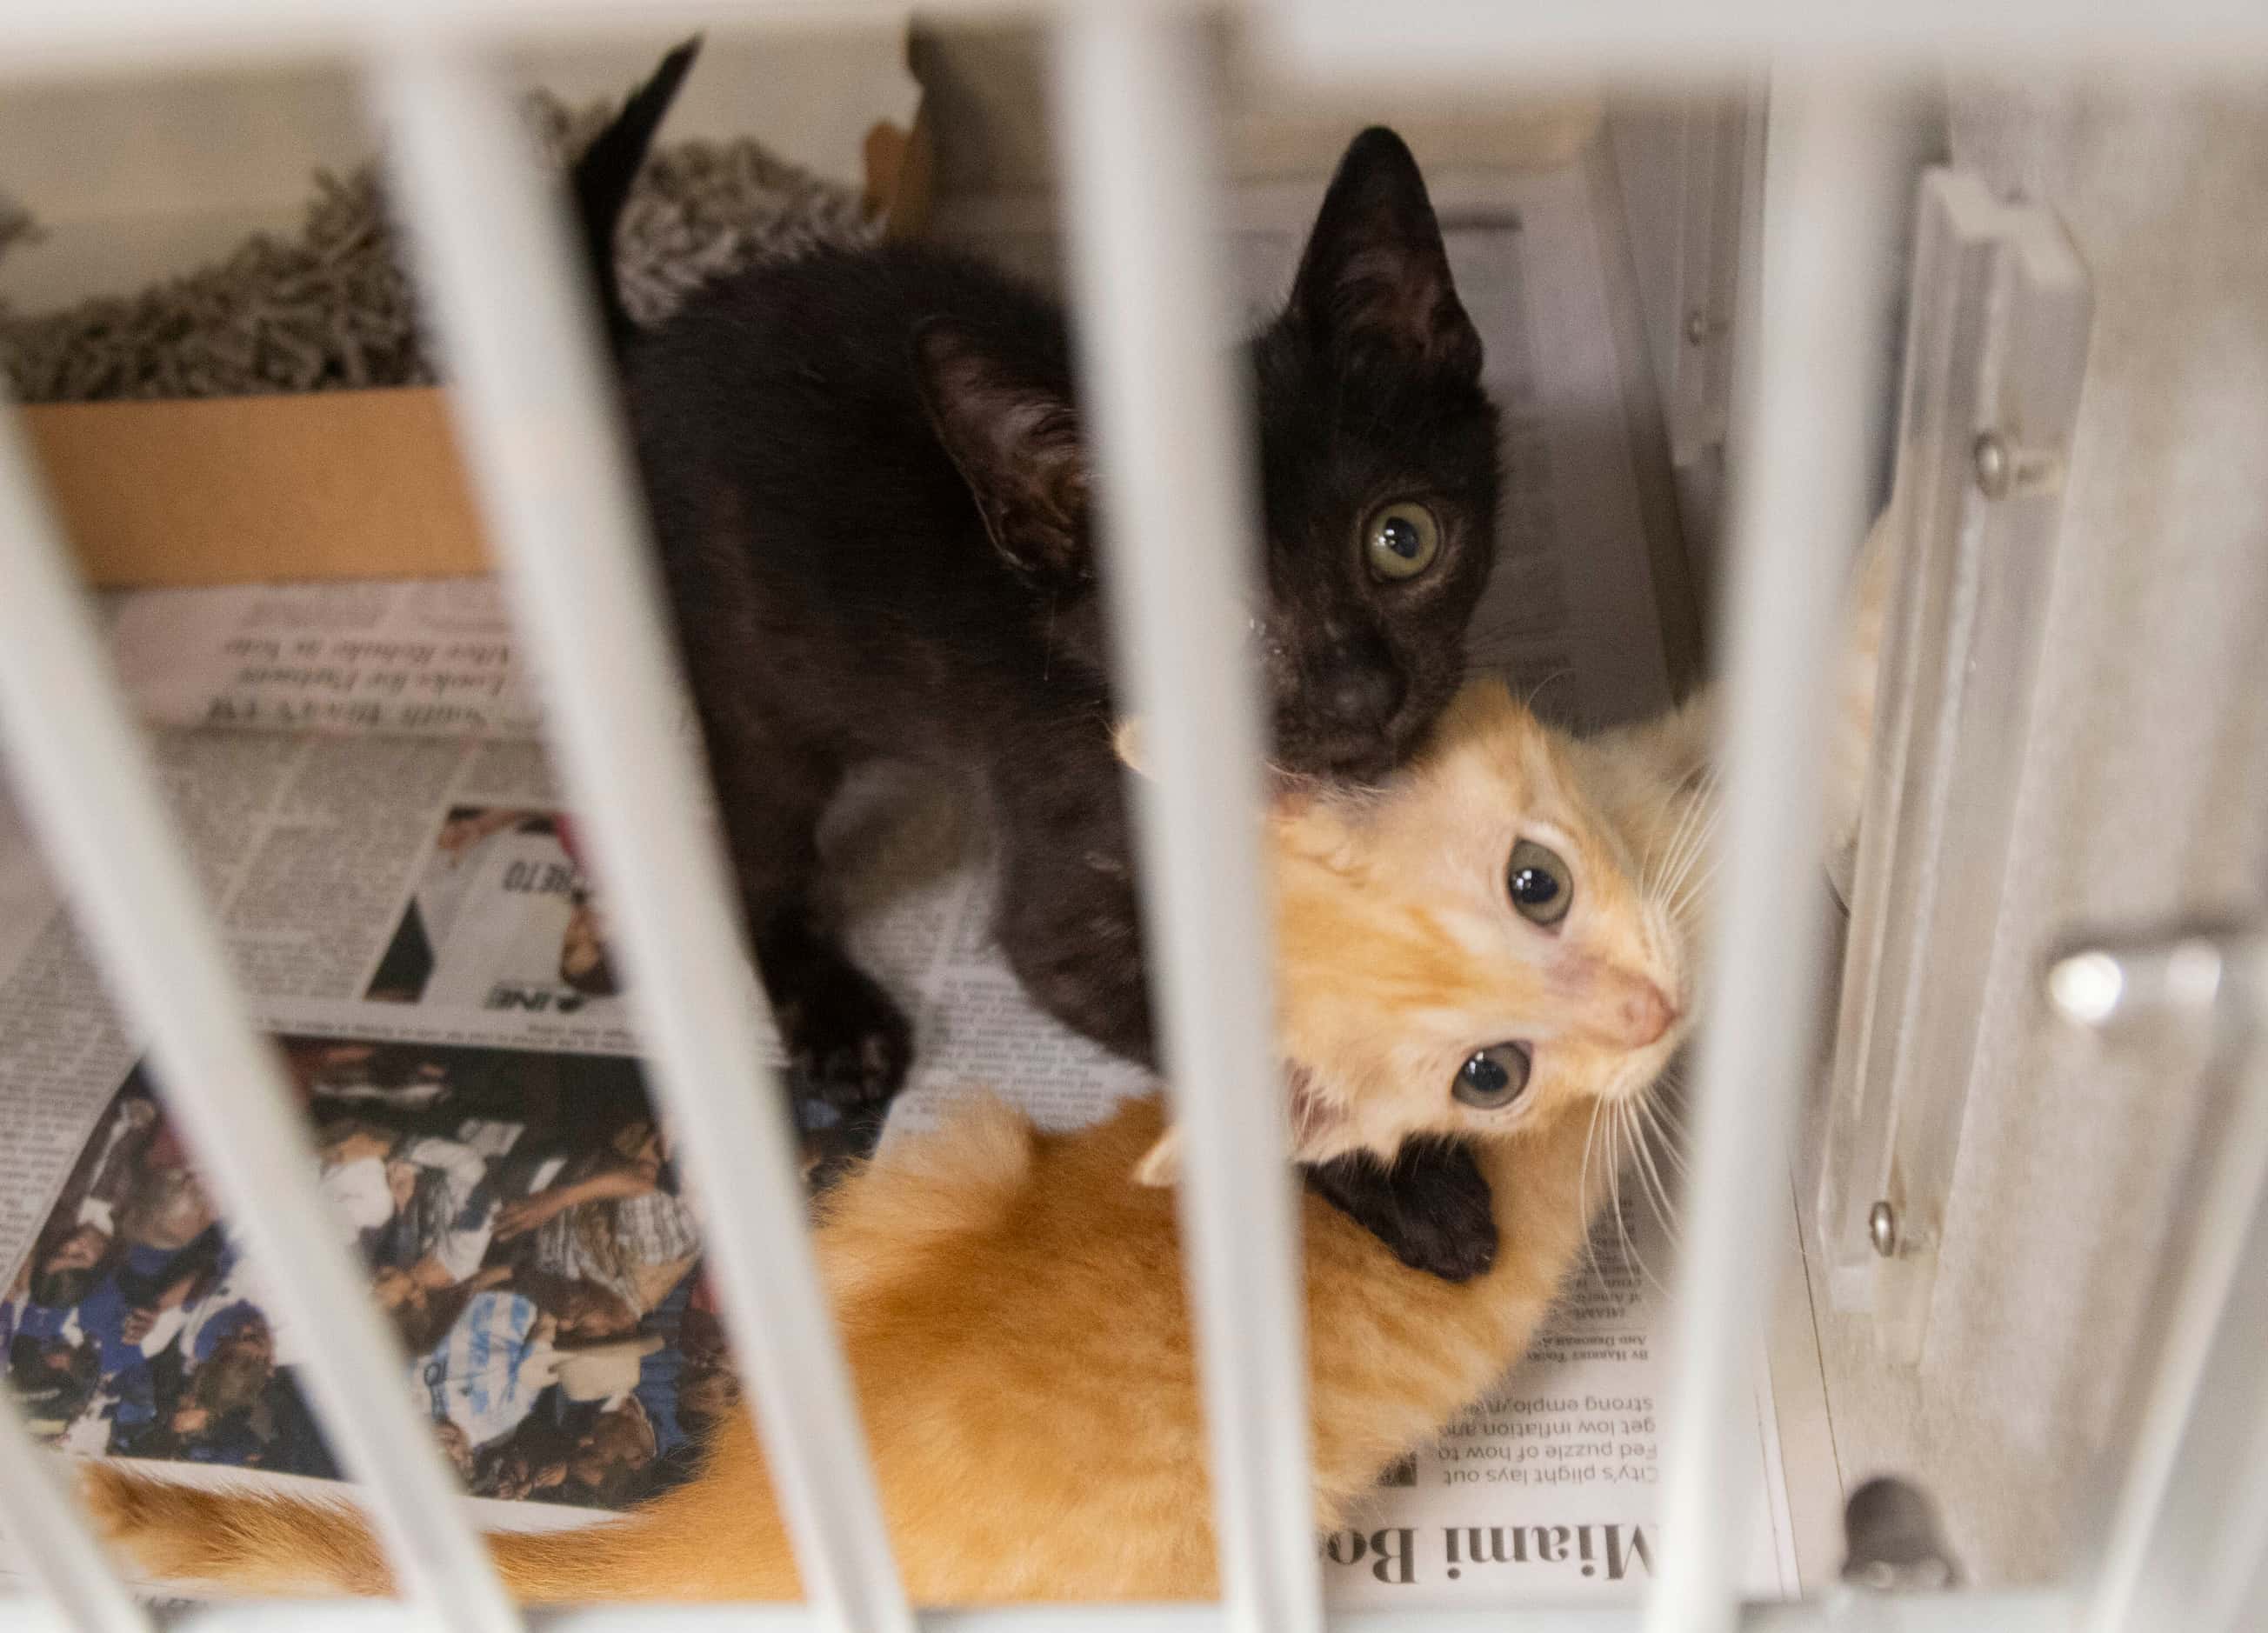 Nine-week-old kittens Calvin and Hobbes play in their kennel. Many animals to share boarding...